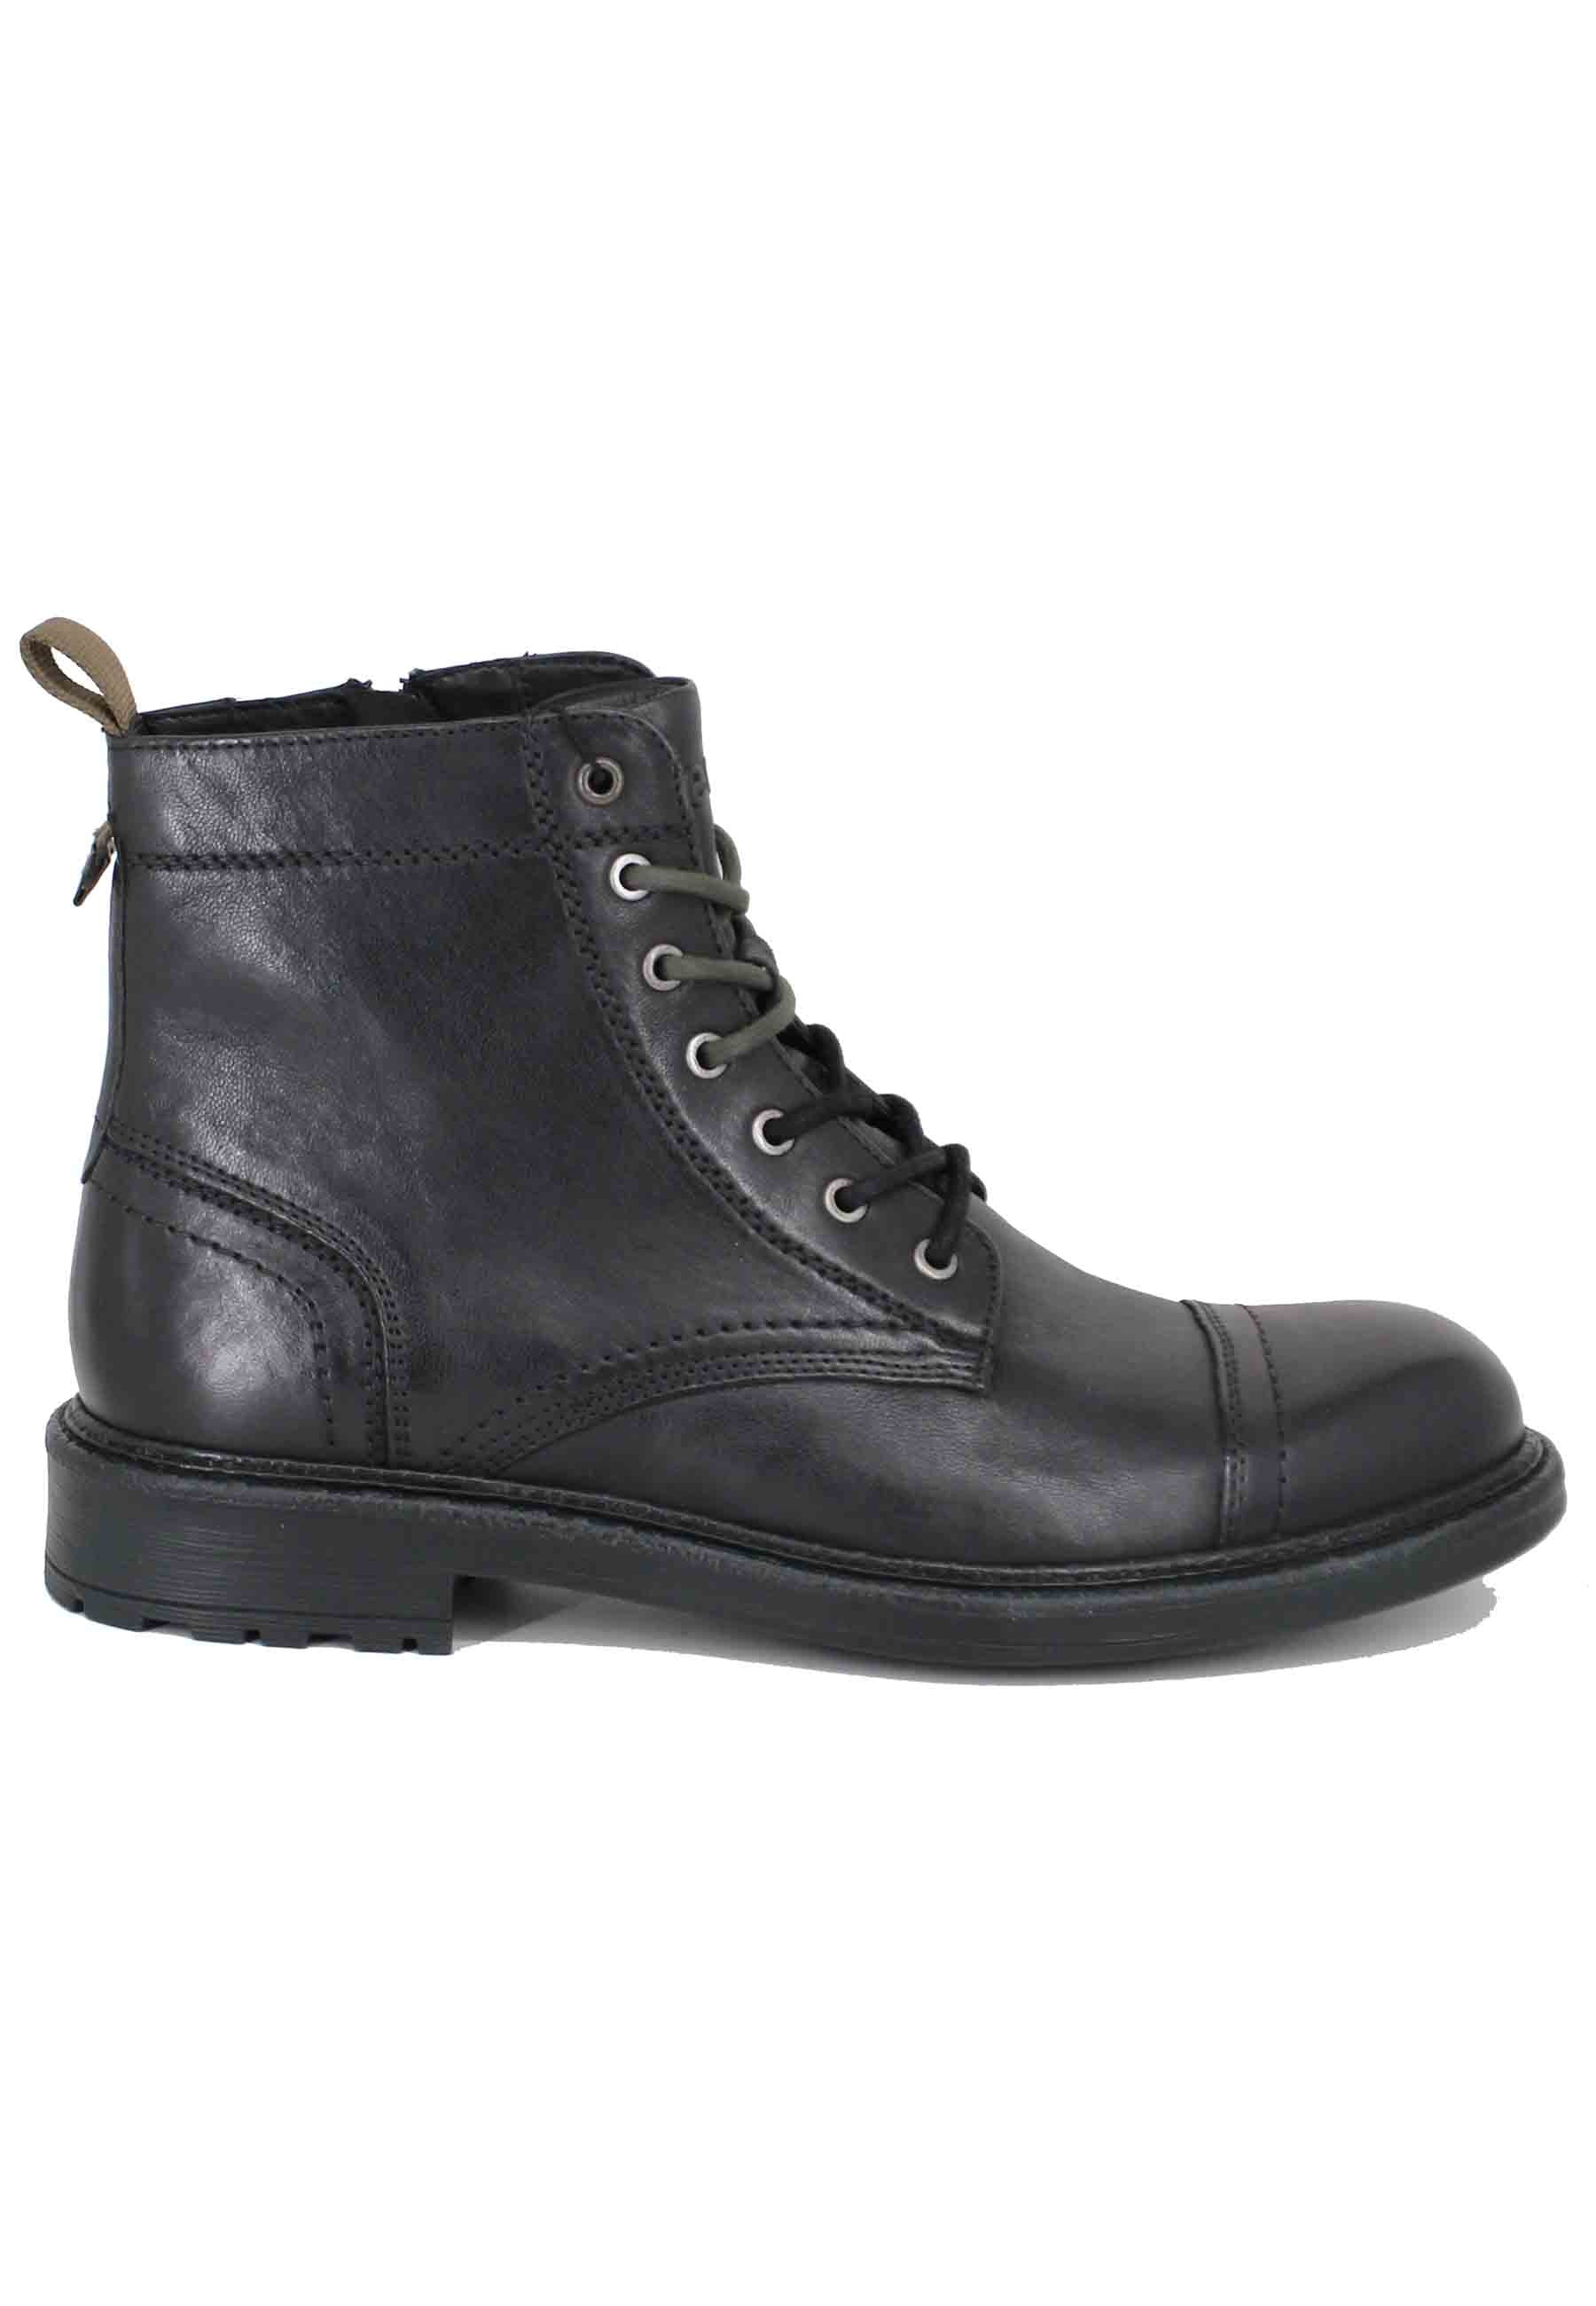 Maywood men's black leather lace-up ankle boots